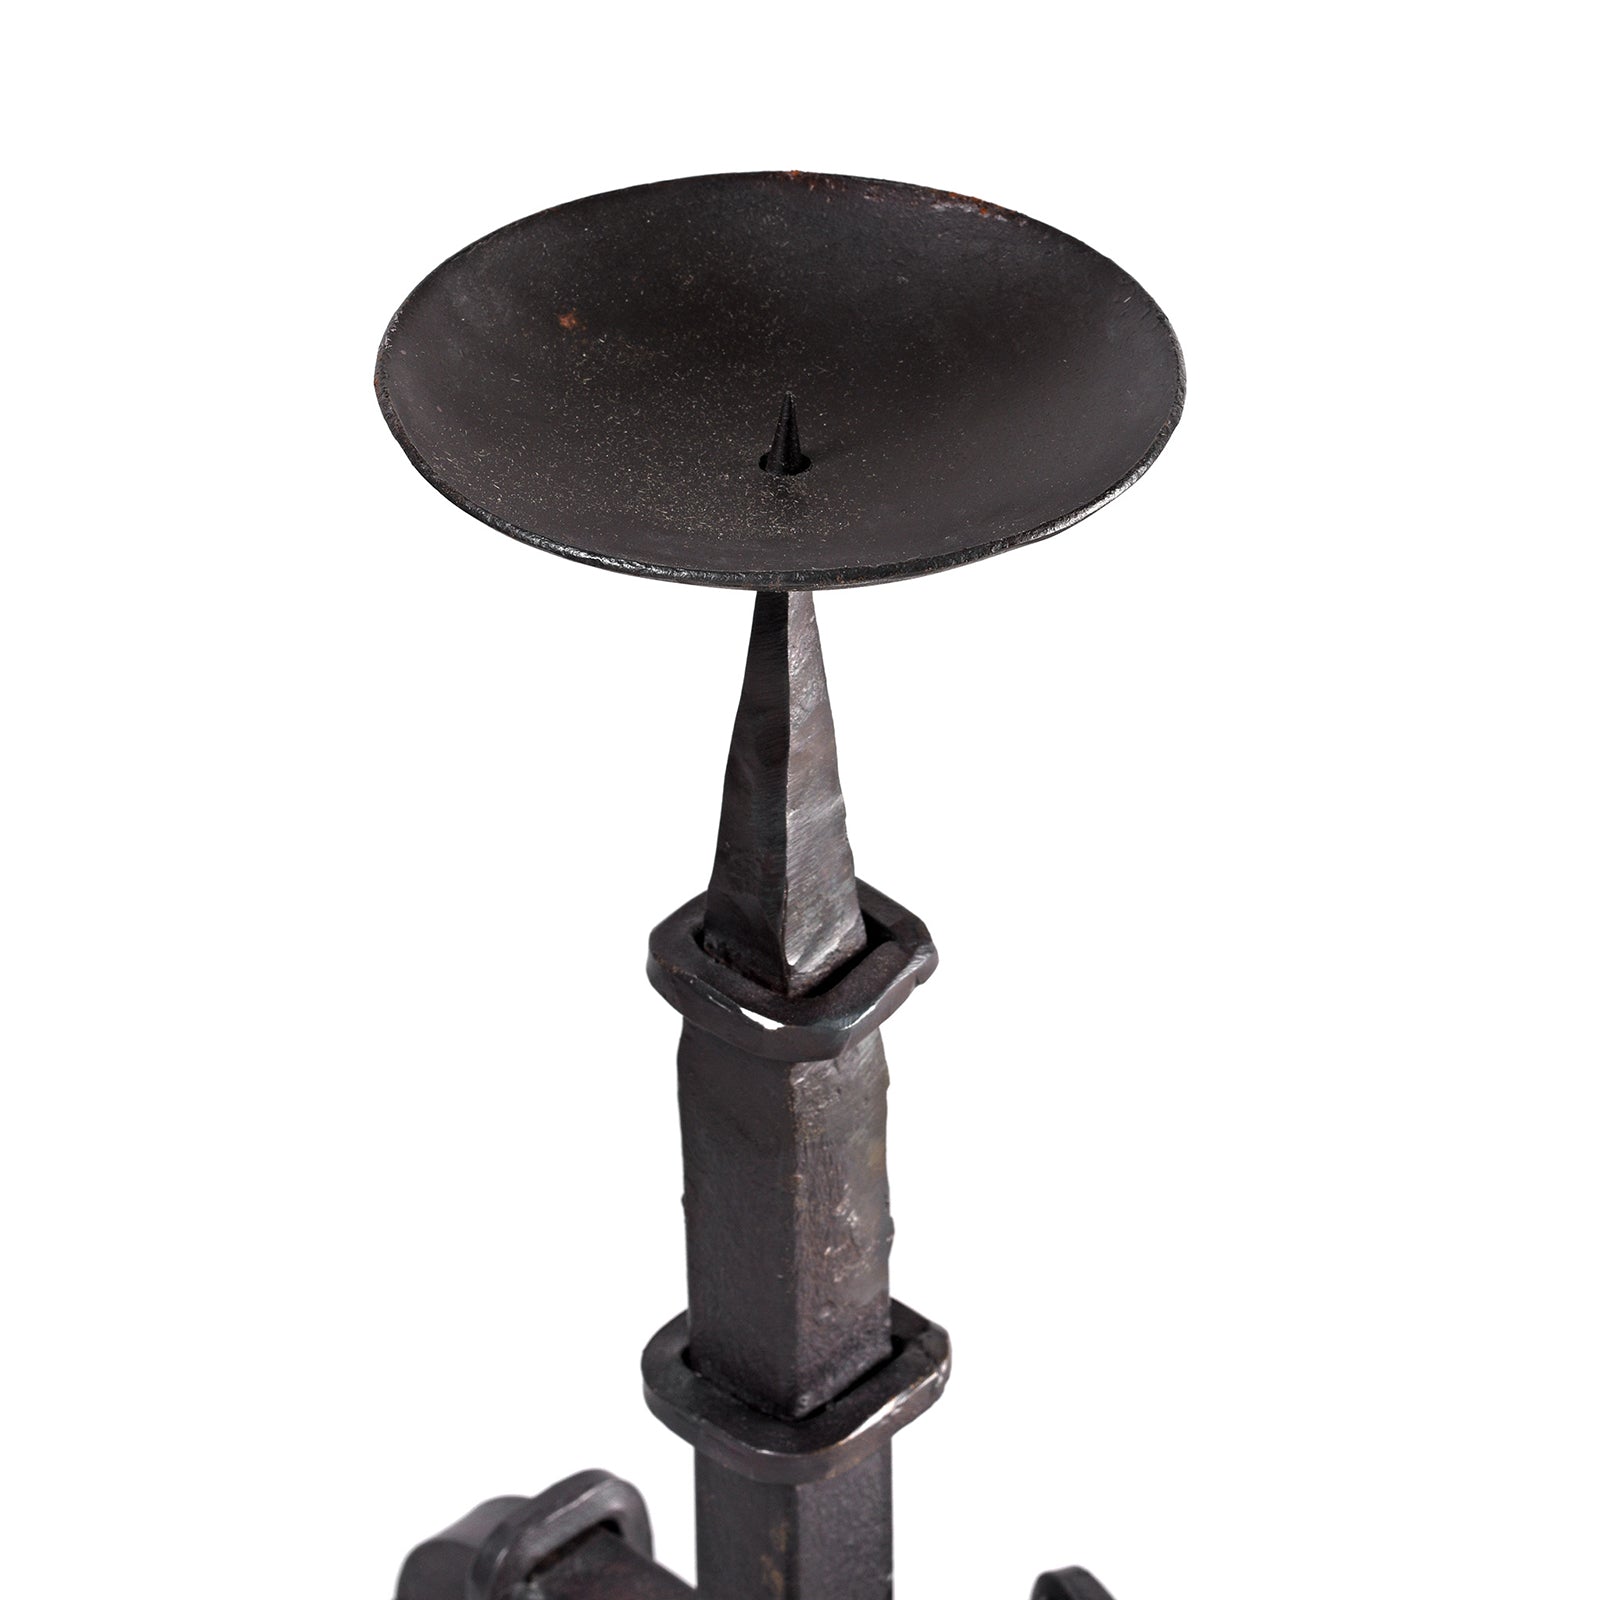 Wrought Iron Candlestick From Rajasthan | Indigo Antiques